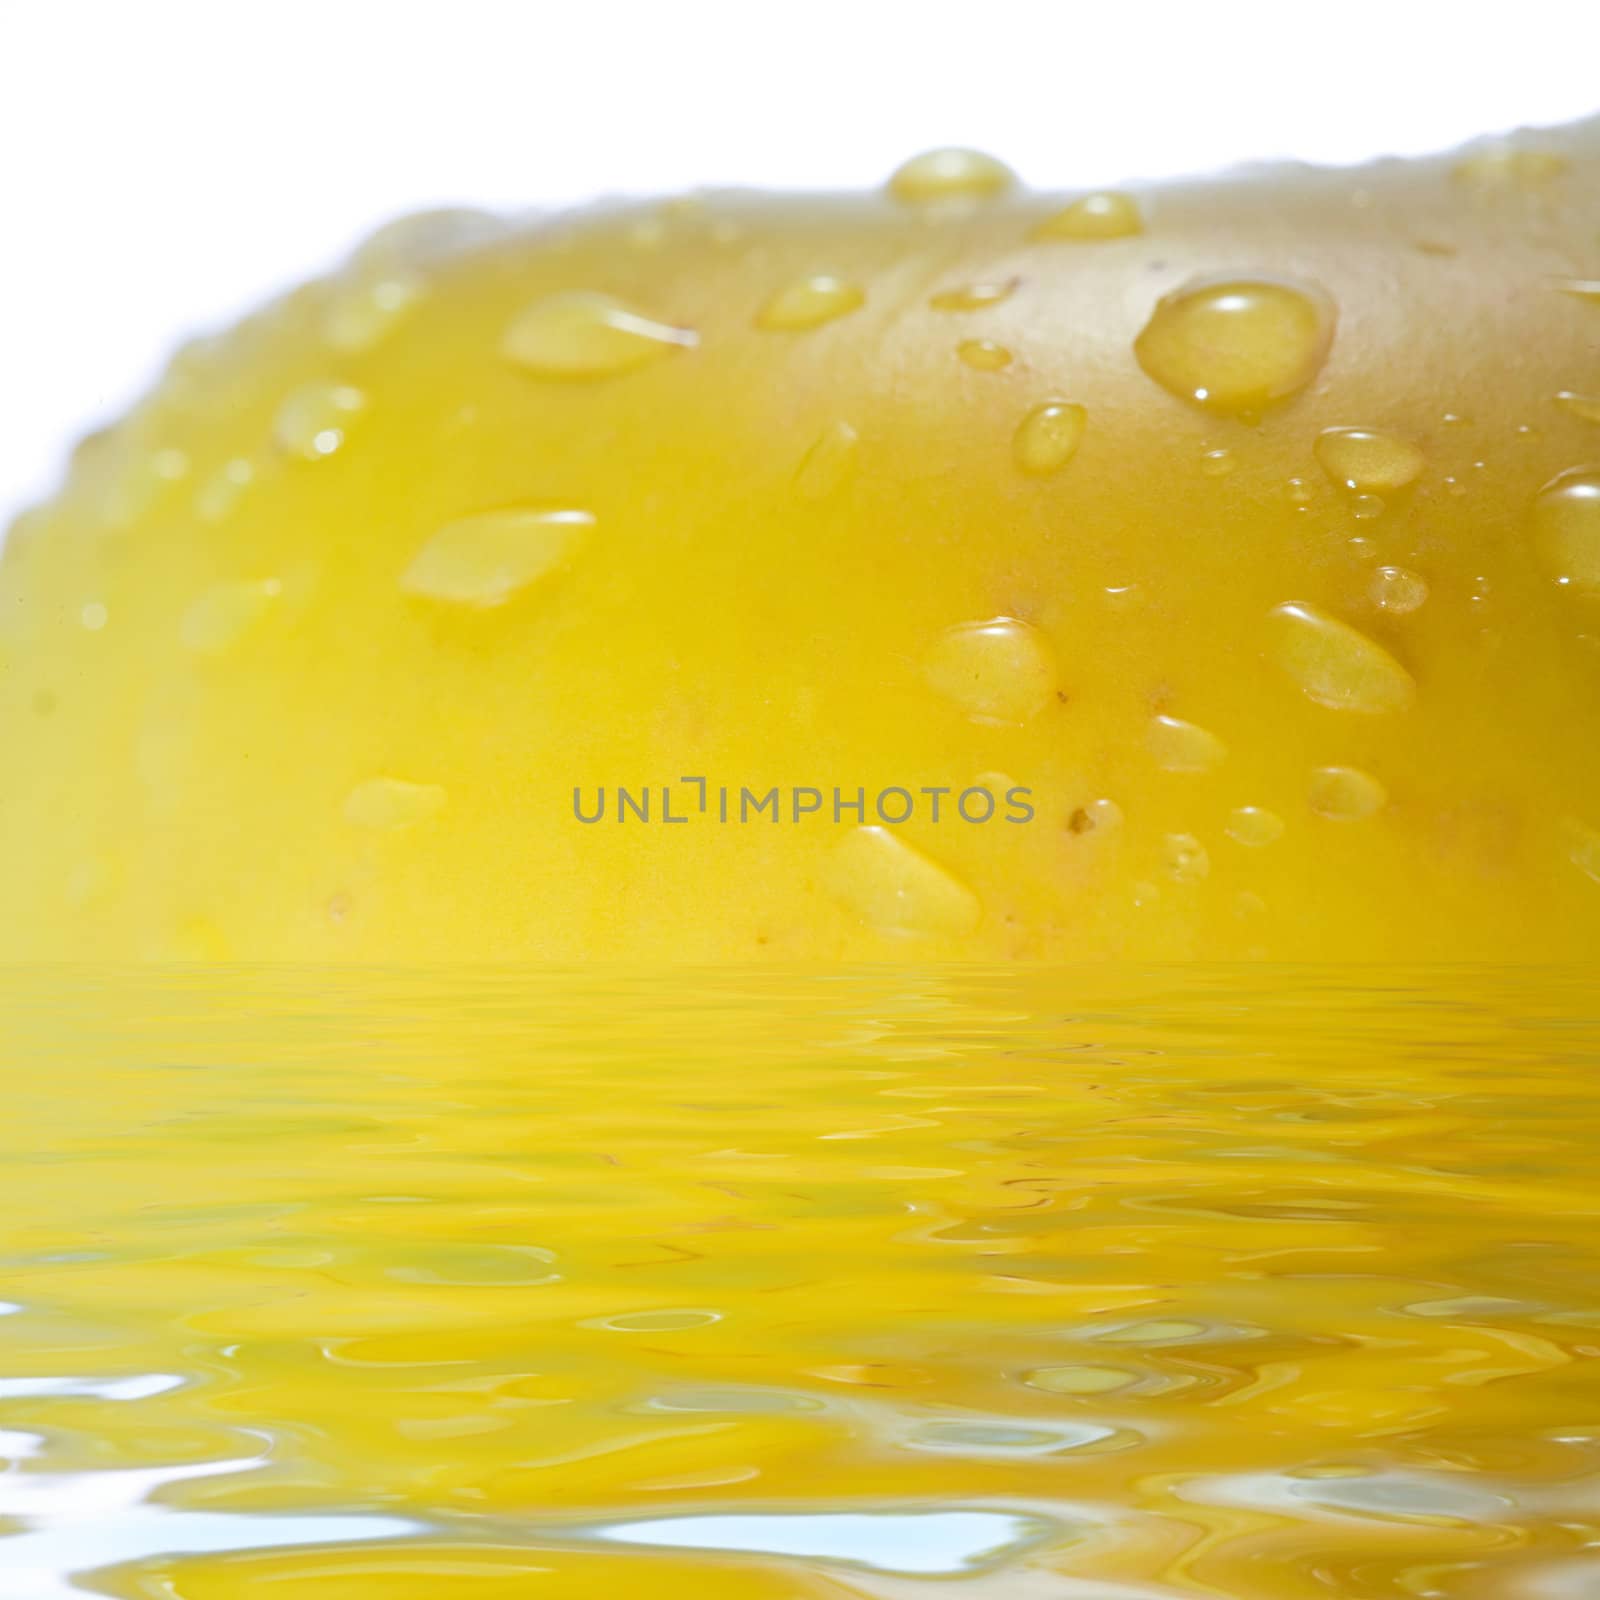 Stock photo: nature theme: an image of water drops on yellow apple